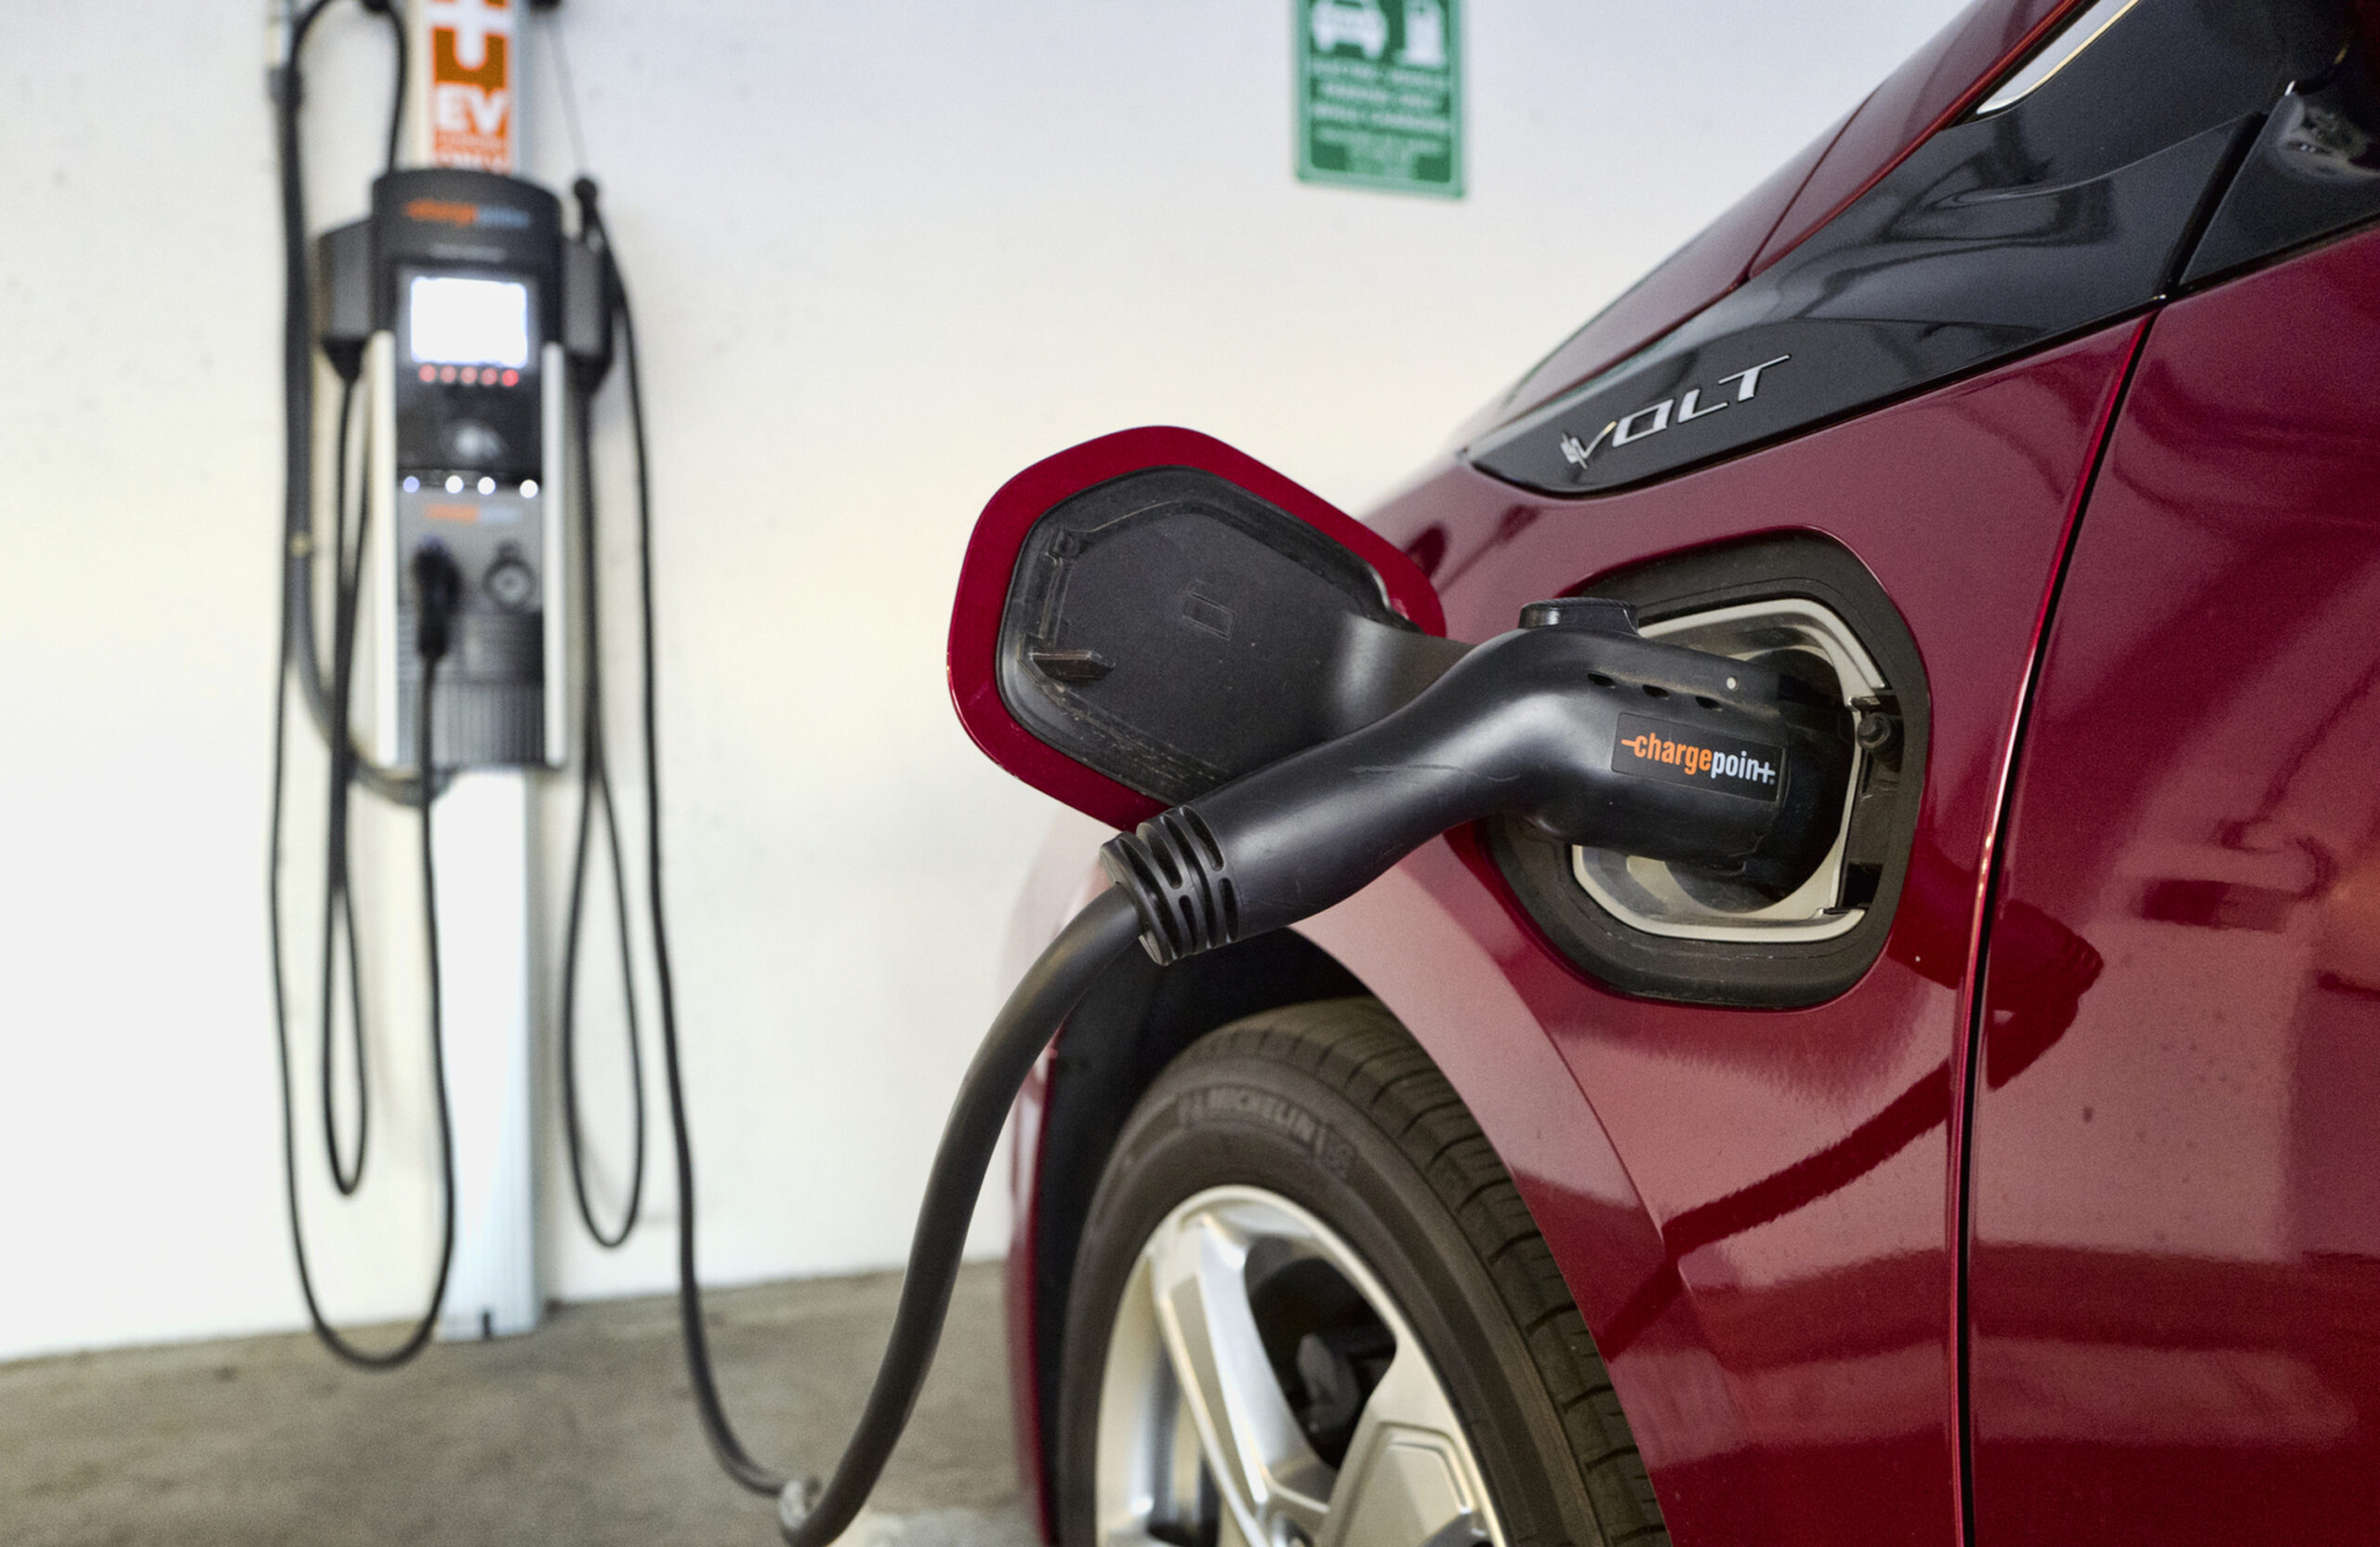 Second round of subsidies for EV purchase to launch Thursday